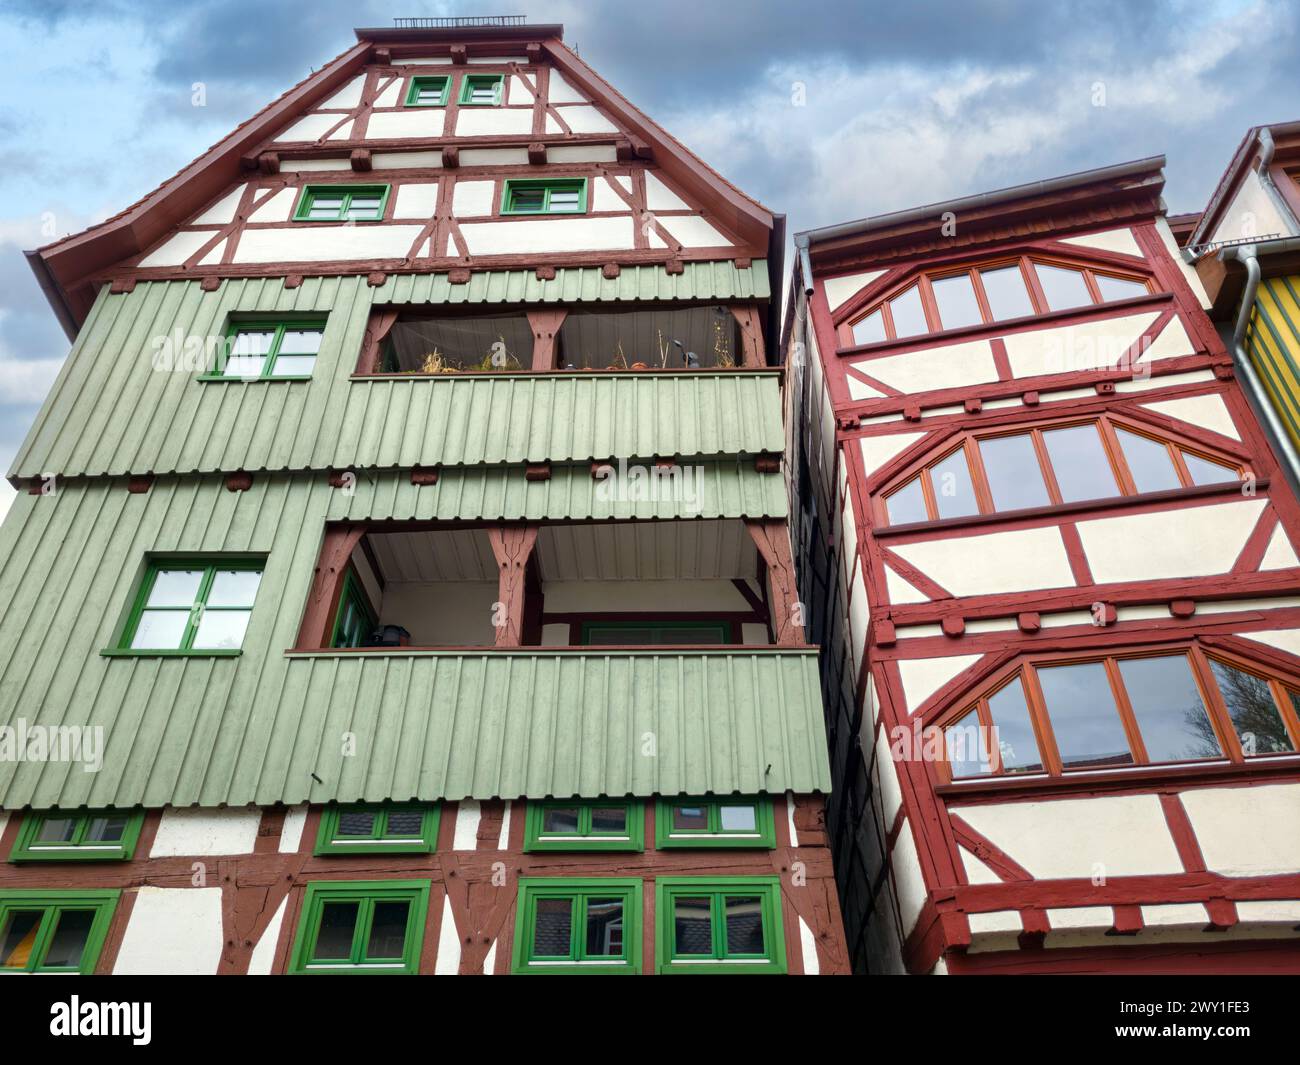 Old half-timbered houses in the Fischerviertel, Ulm, Baden-Württemberg, Germany Stock Photo